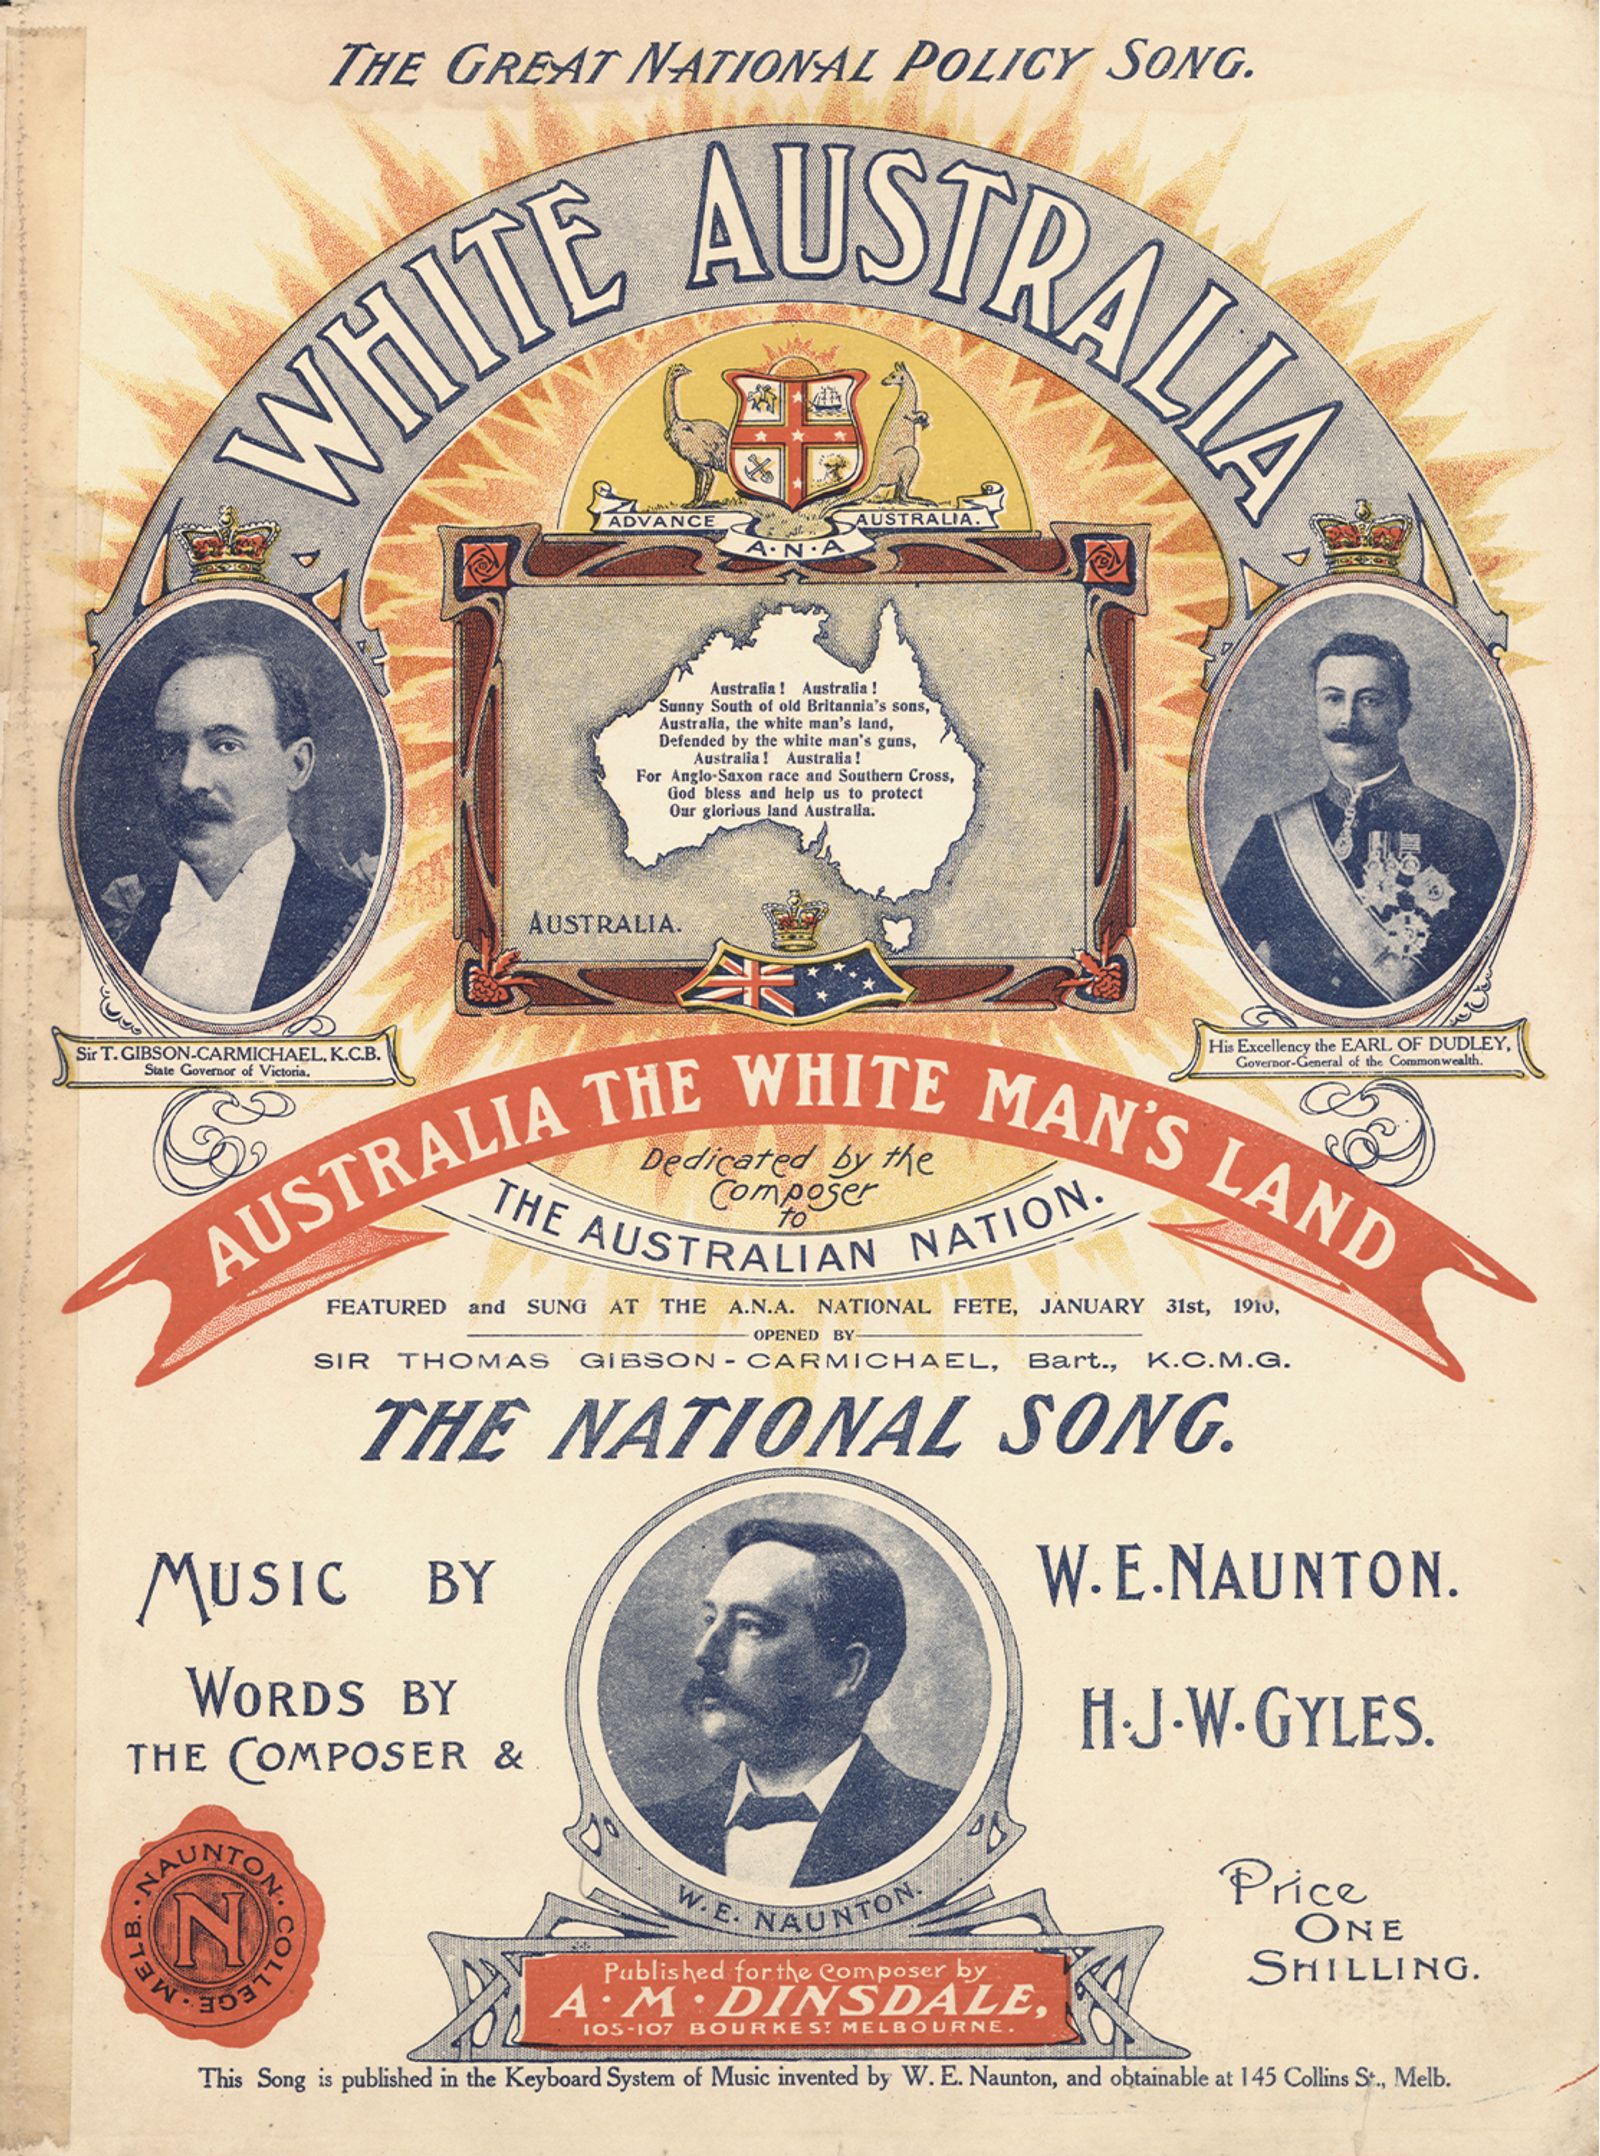 © Erin Lee - White Australia: The Great National Policy song. Music by W. E. Naunton, words by the composer and H. J. W. Gyles from 1910.